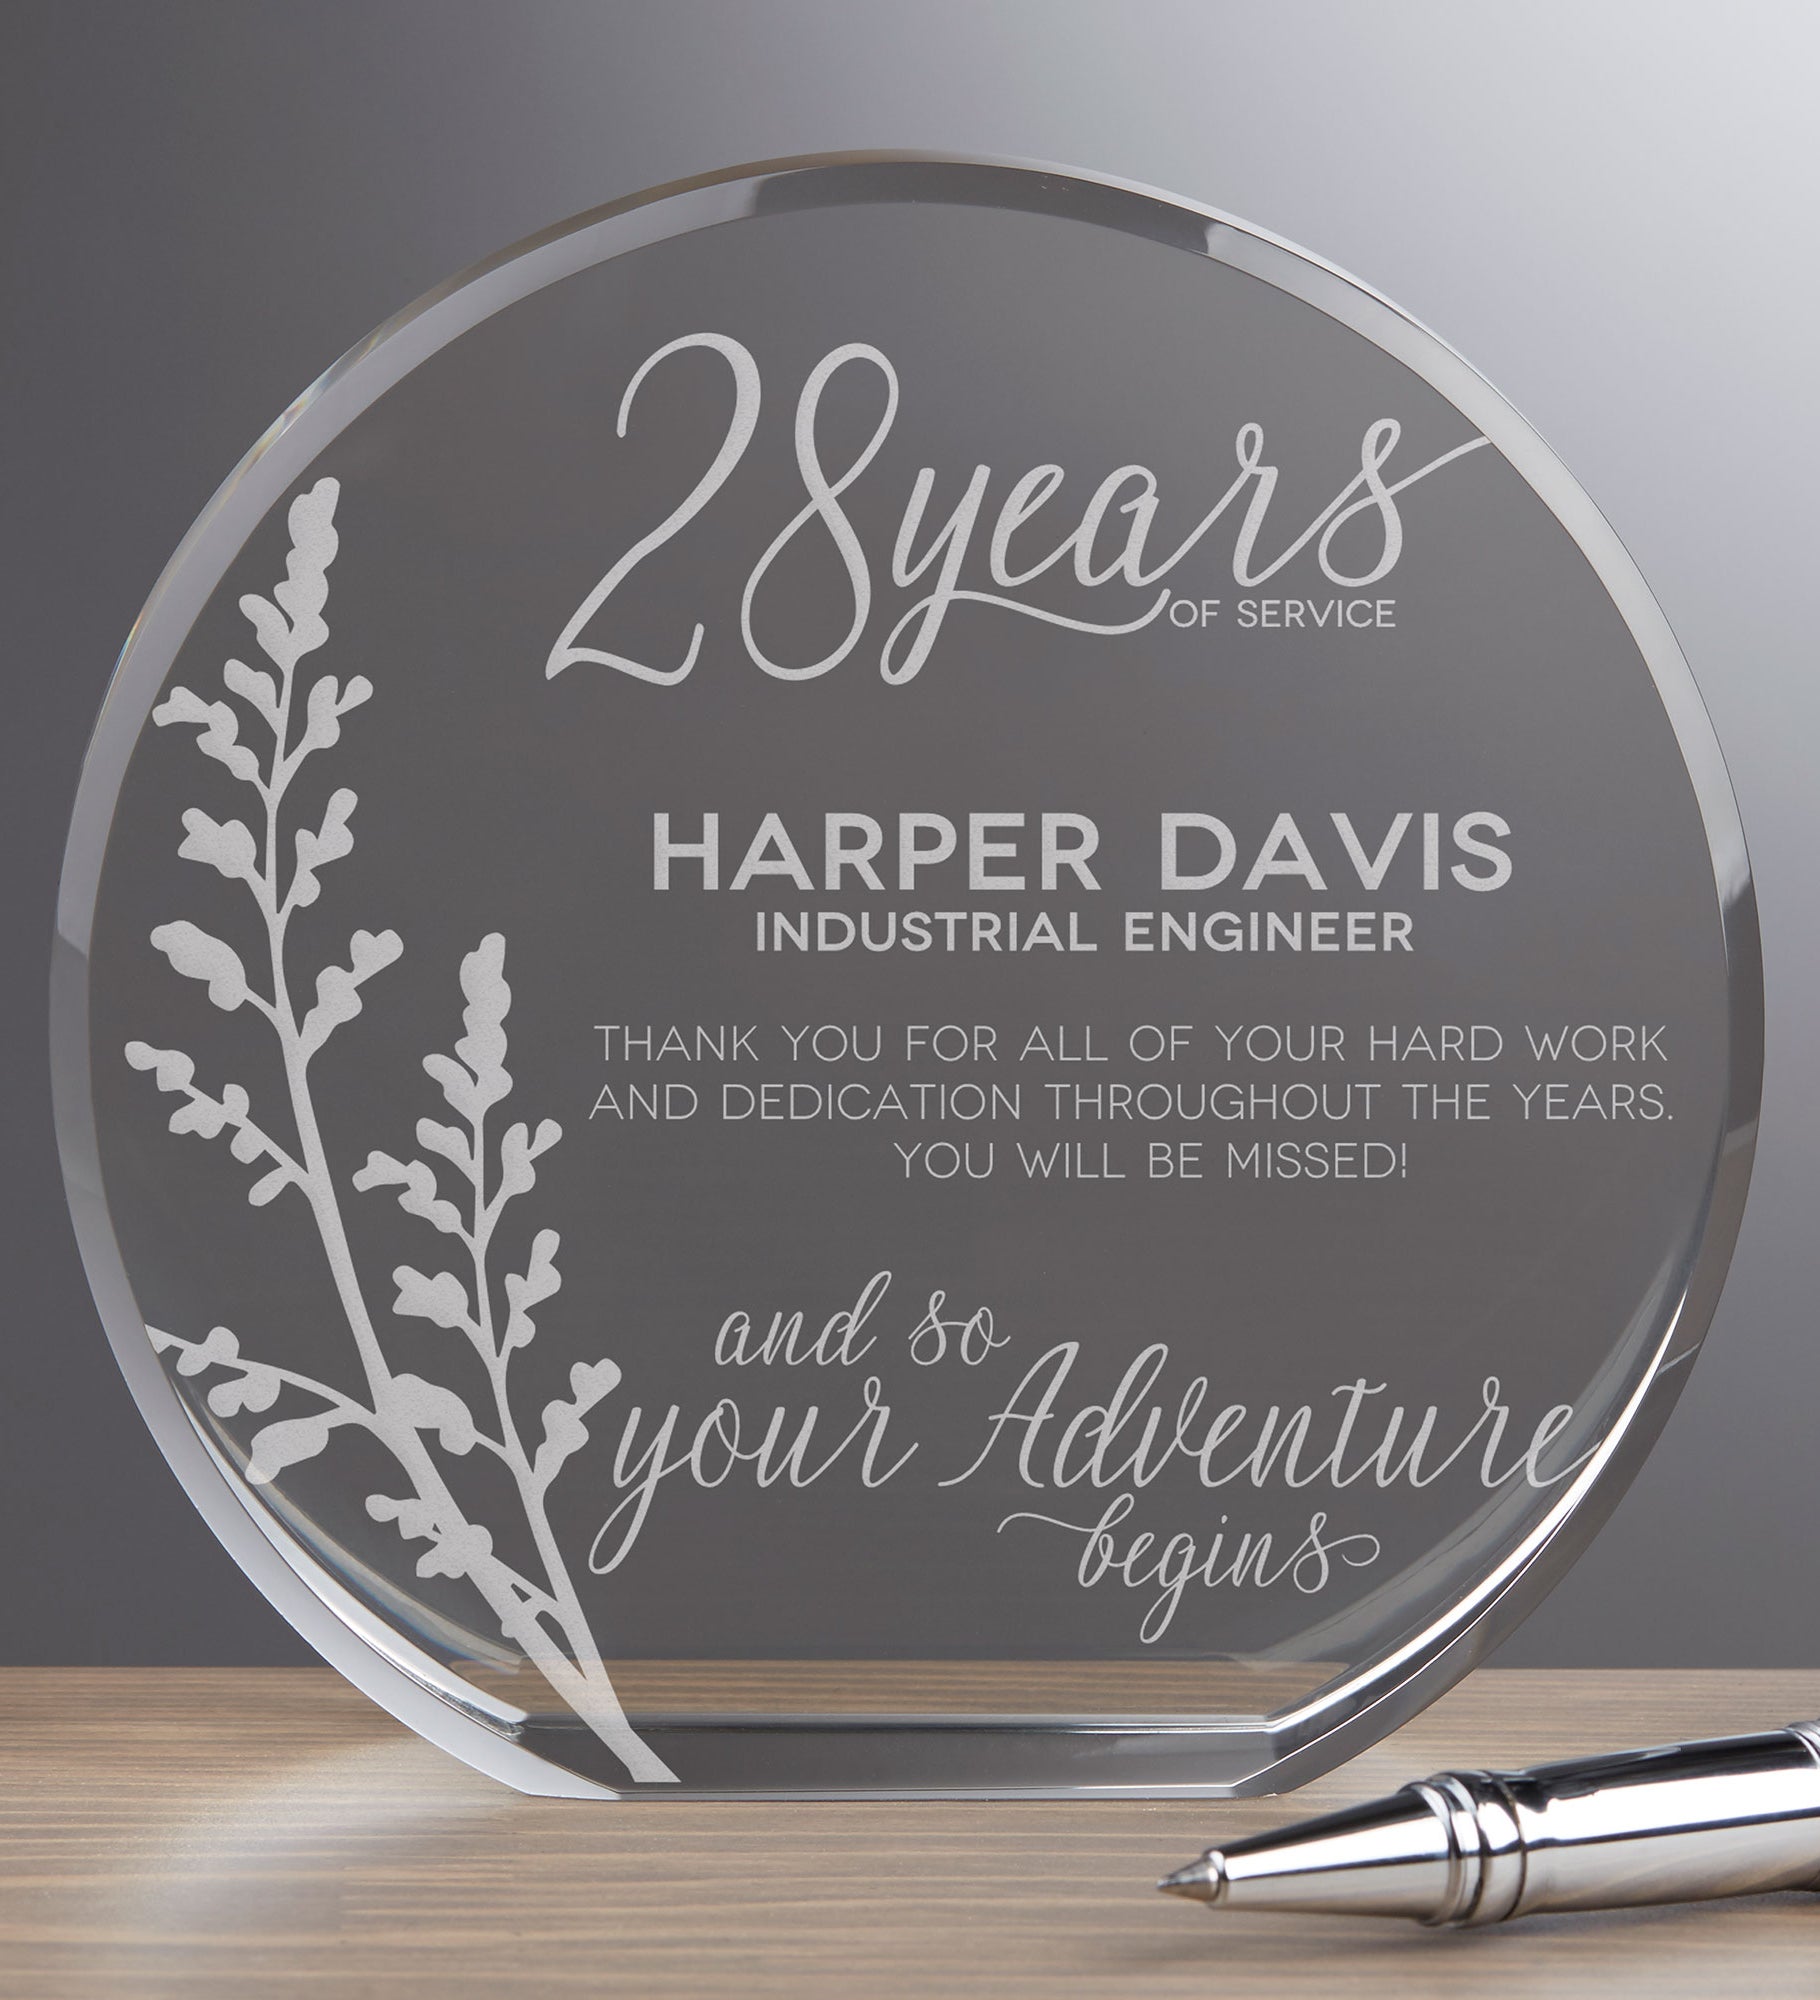 Retirement Round Crystal Personalized Award